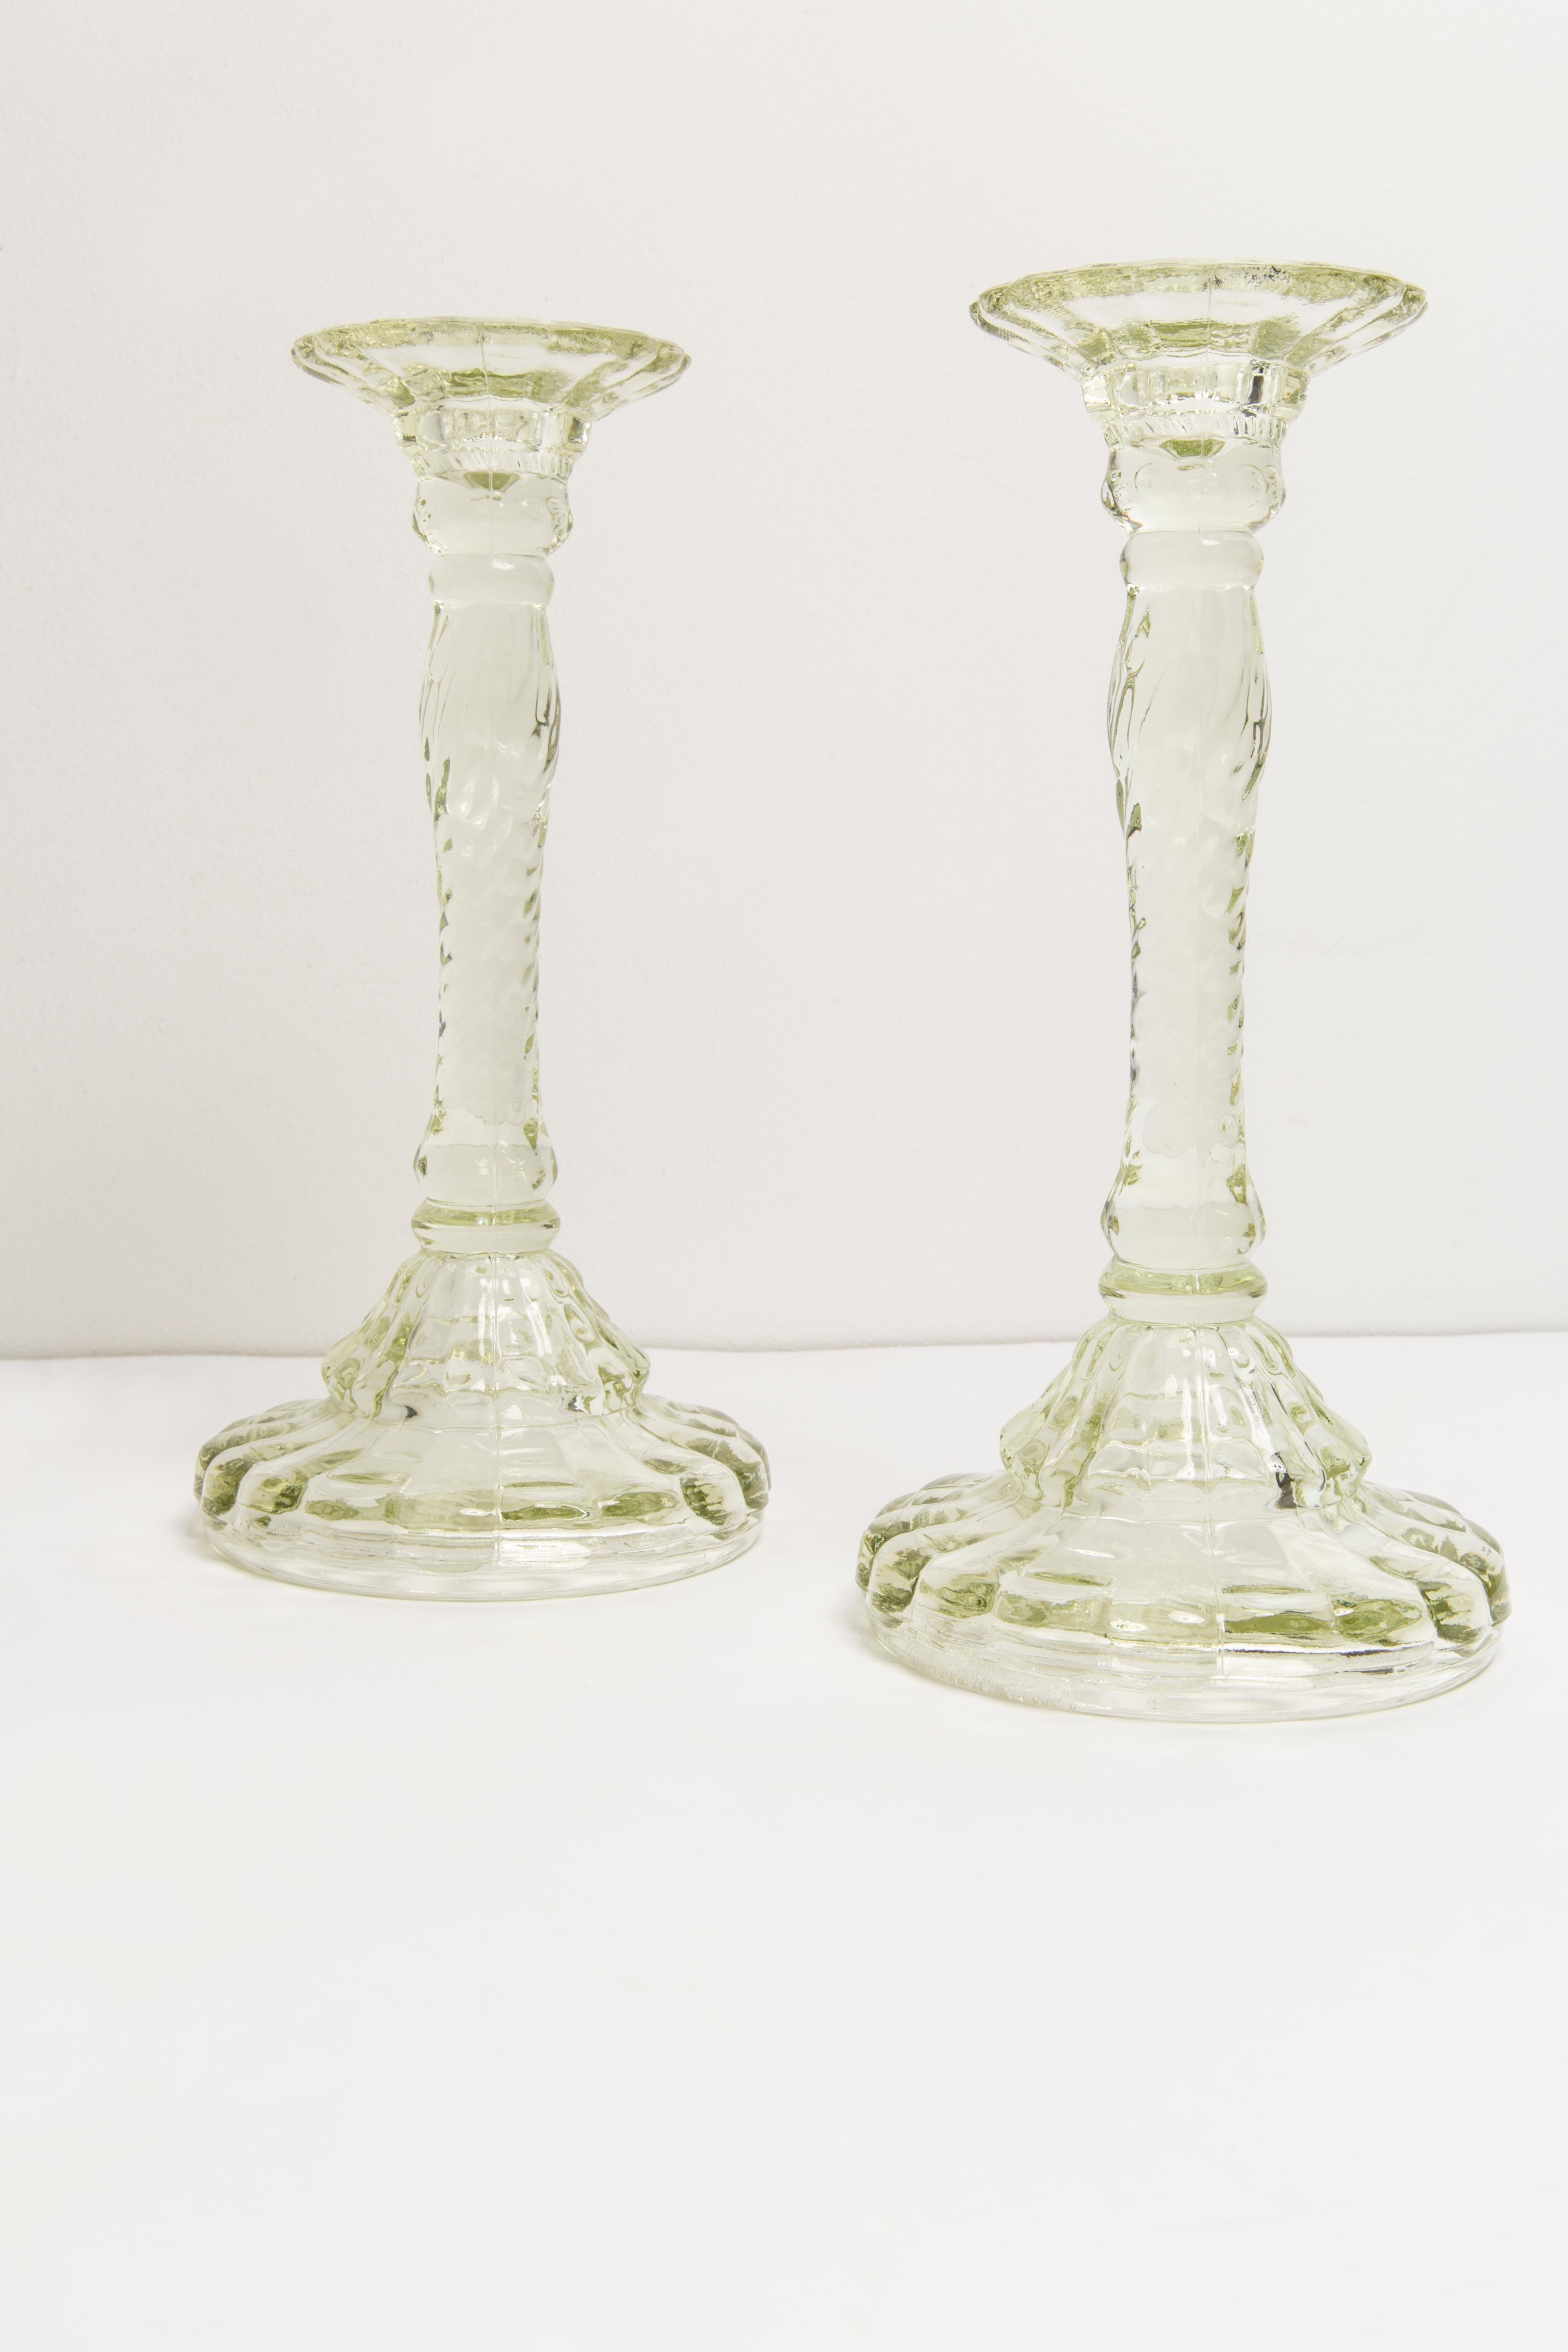 Polish Set of Two Mid Century Light Green Glass Candlesticks, Europe, 1960s For Sale